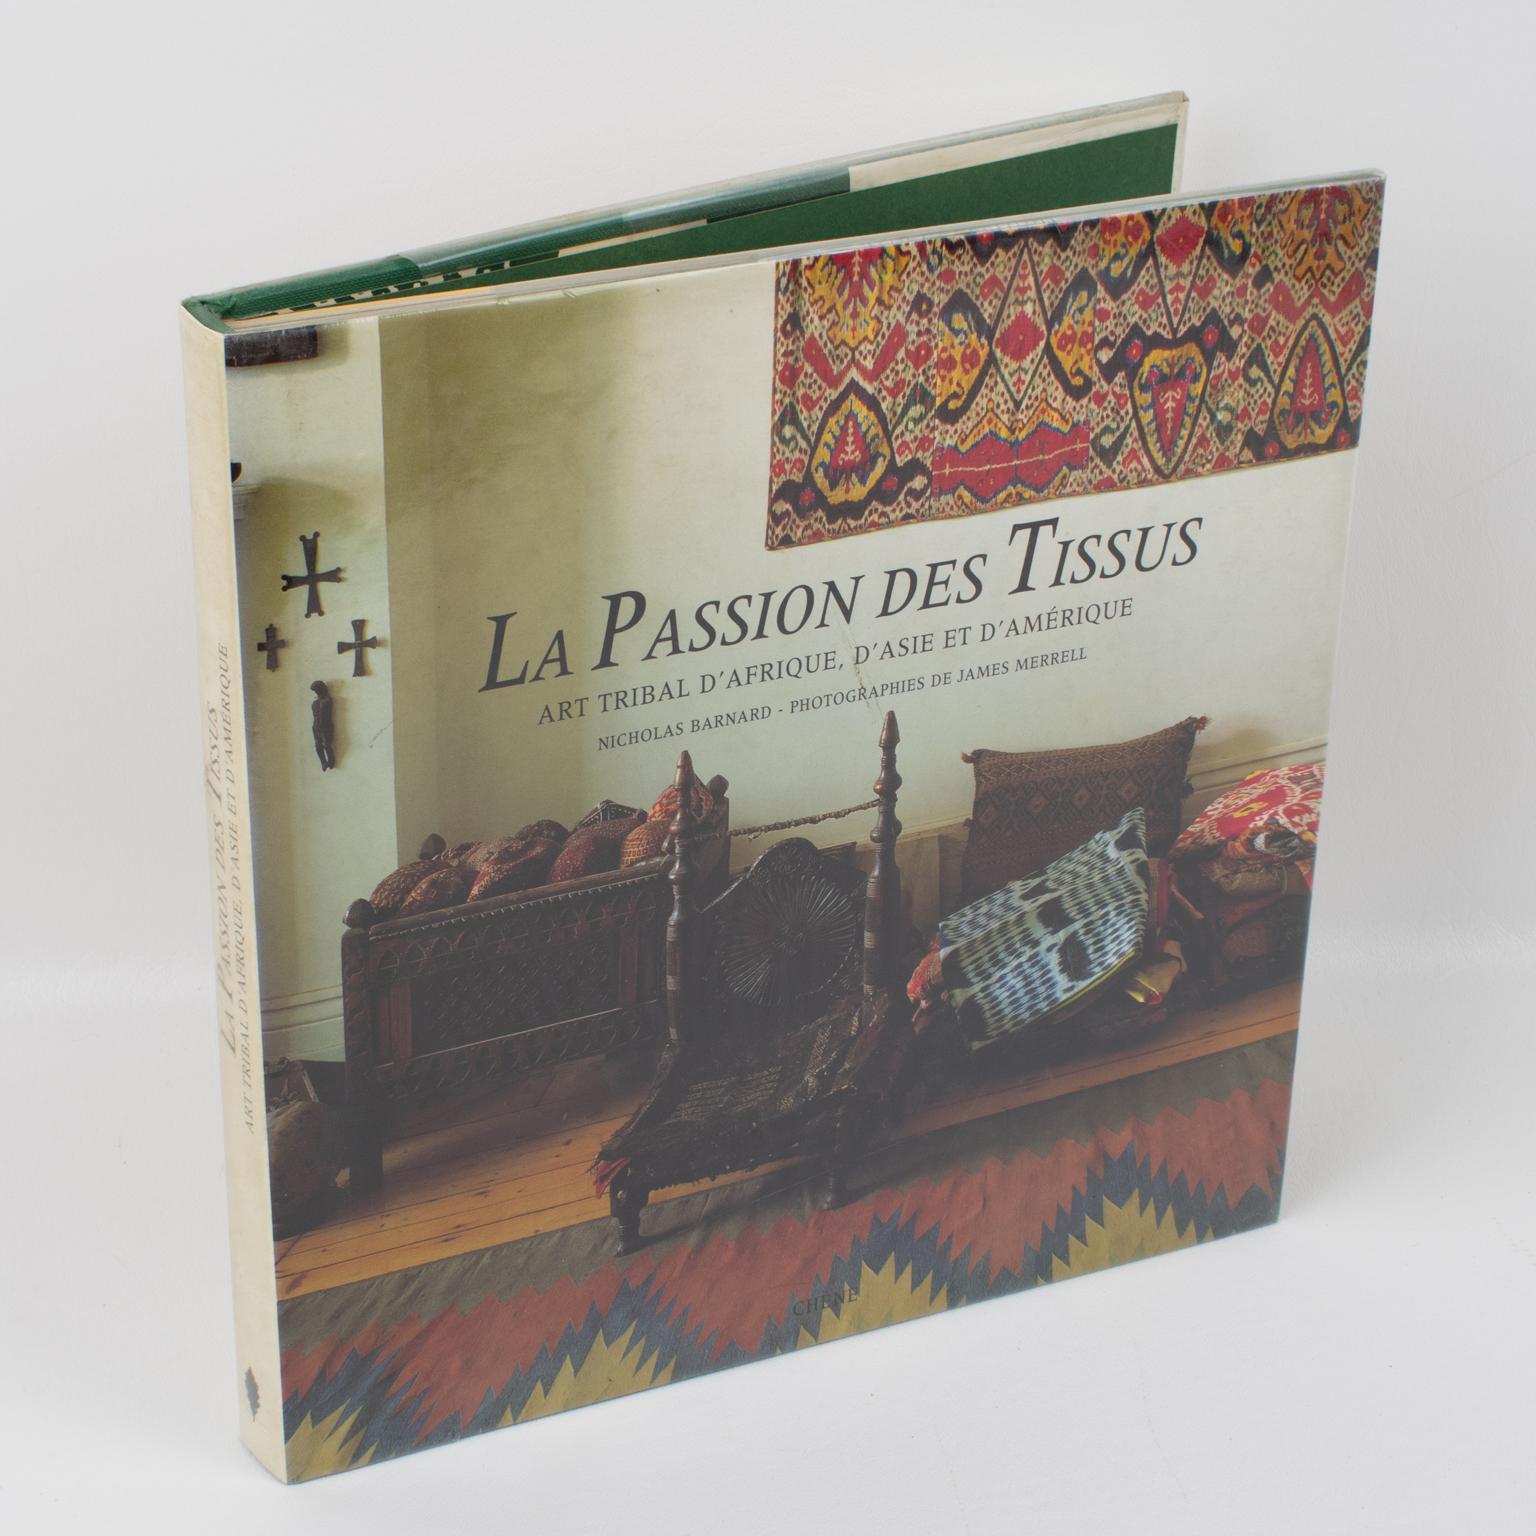 La Passion des Tissus, Art Tribal d'Afrique, d'Asie et d'Amerique (Living with Decorative Textiles, Tribal Art from Africa, Asia, and America), French Book by Nicholas Barnard, 1989.
Chinese silks, Egyptian linens, Afghan rugs: every culture